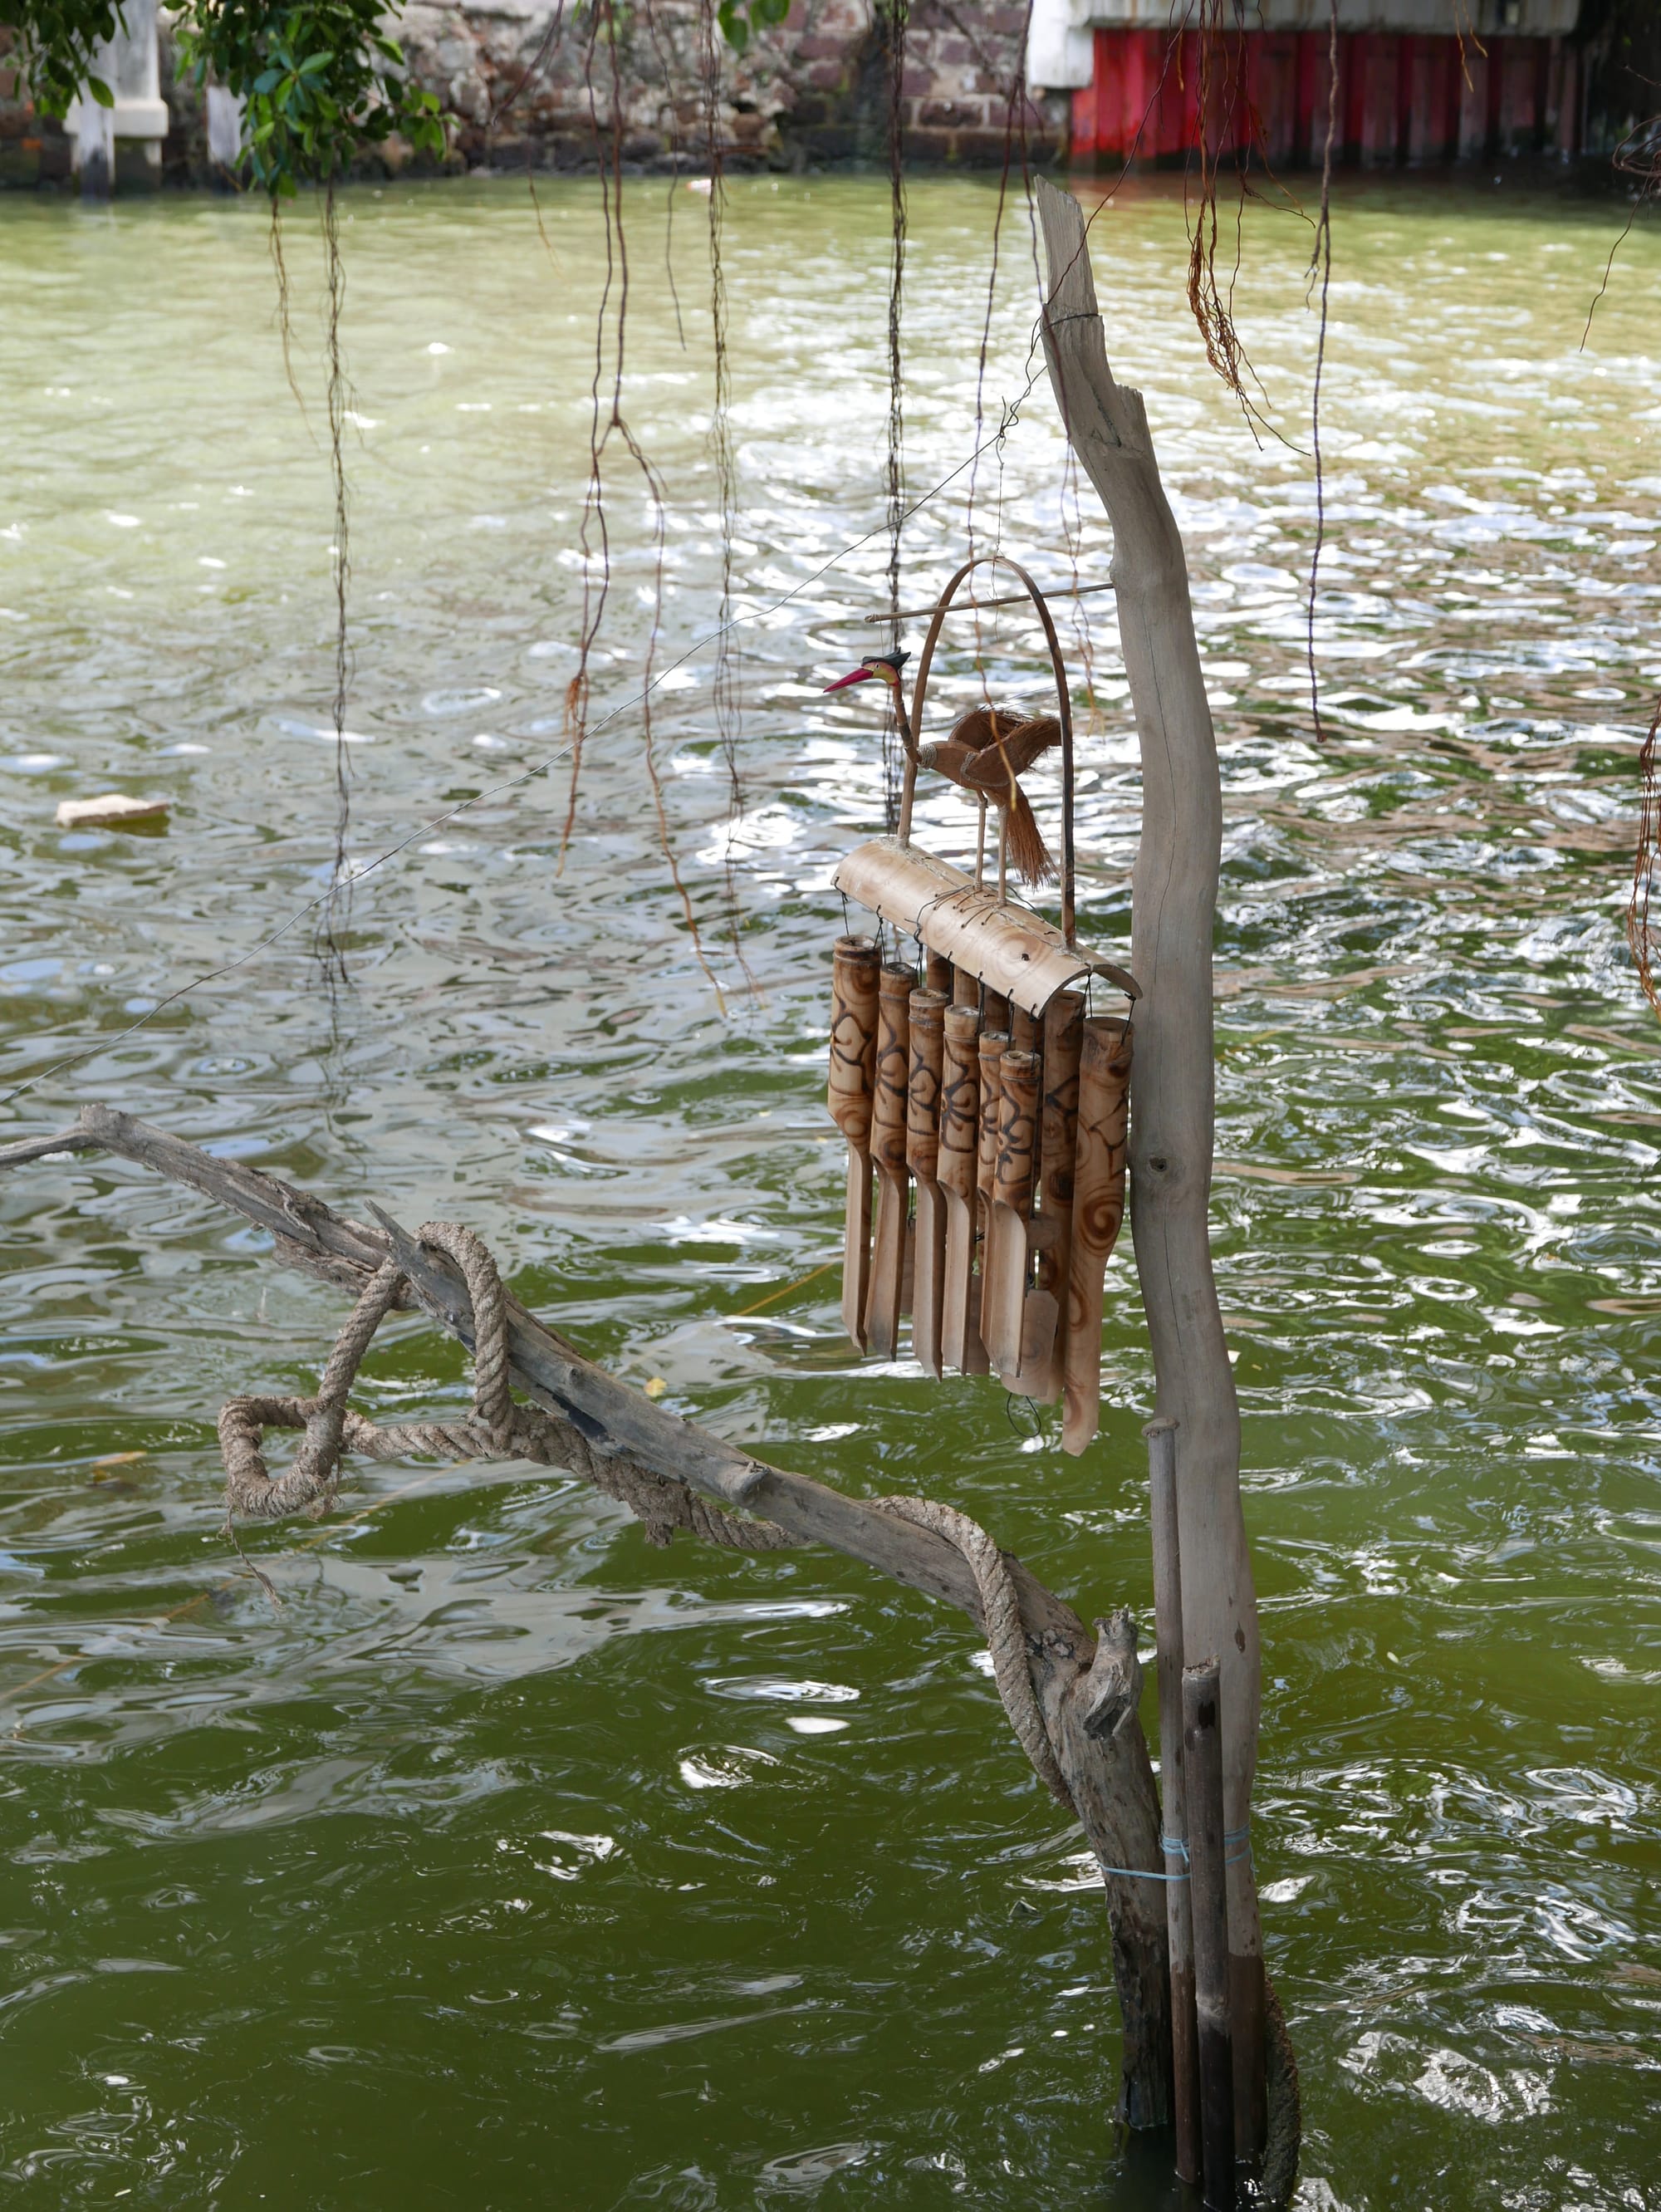 Photo by Author — chimes and the rope — Riverside, Malacca